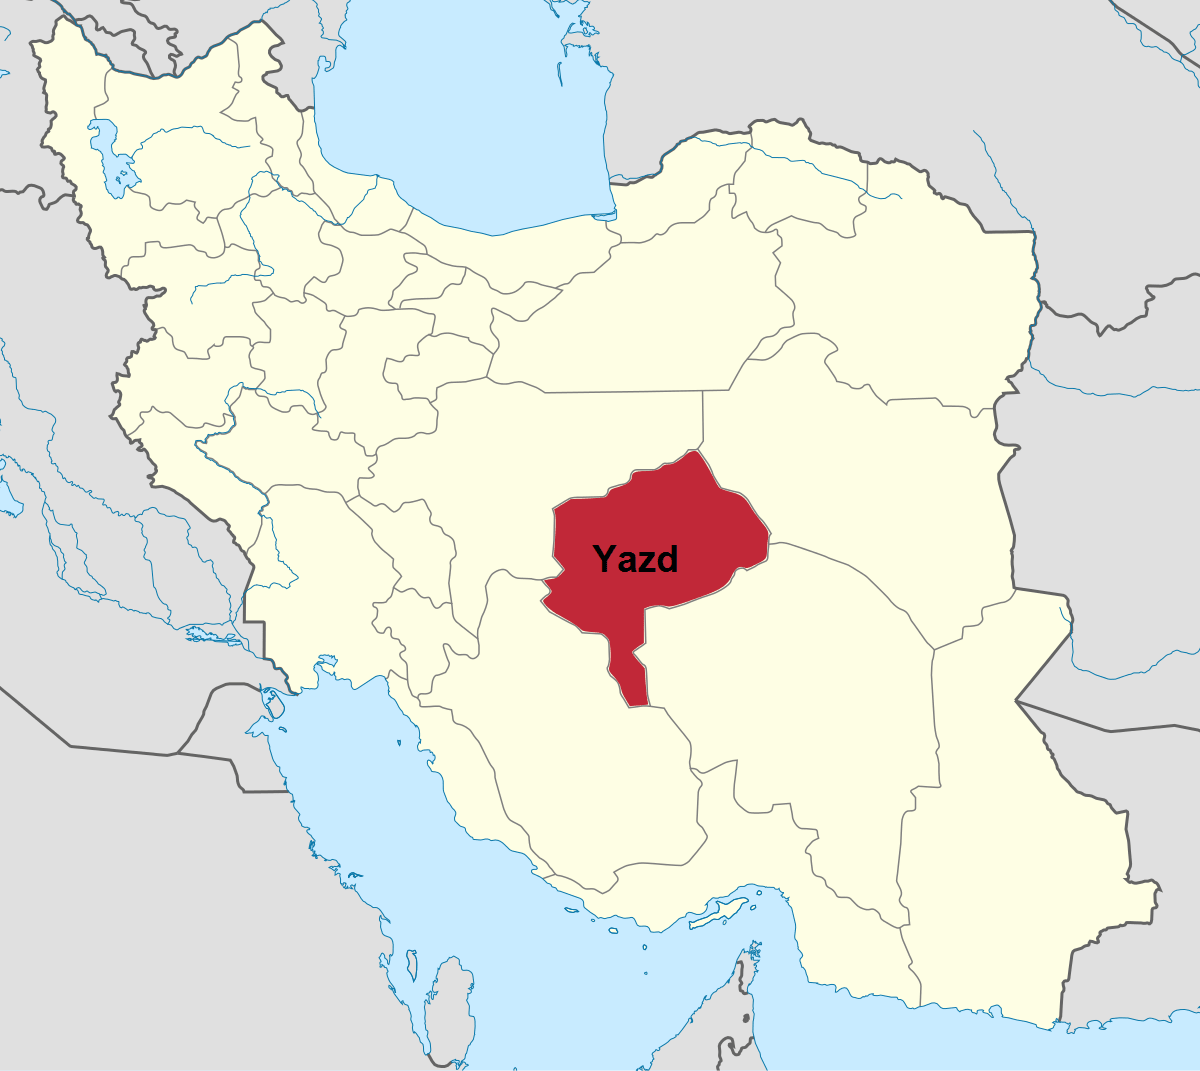 Location-of-Yazd-city-on-the-map-of-Iran-Yazd-province-